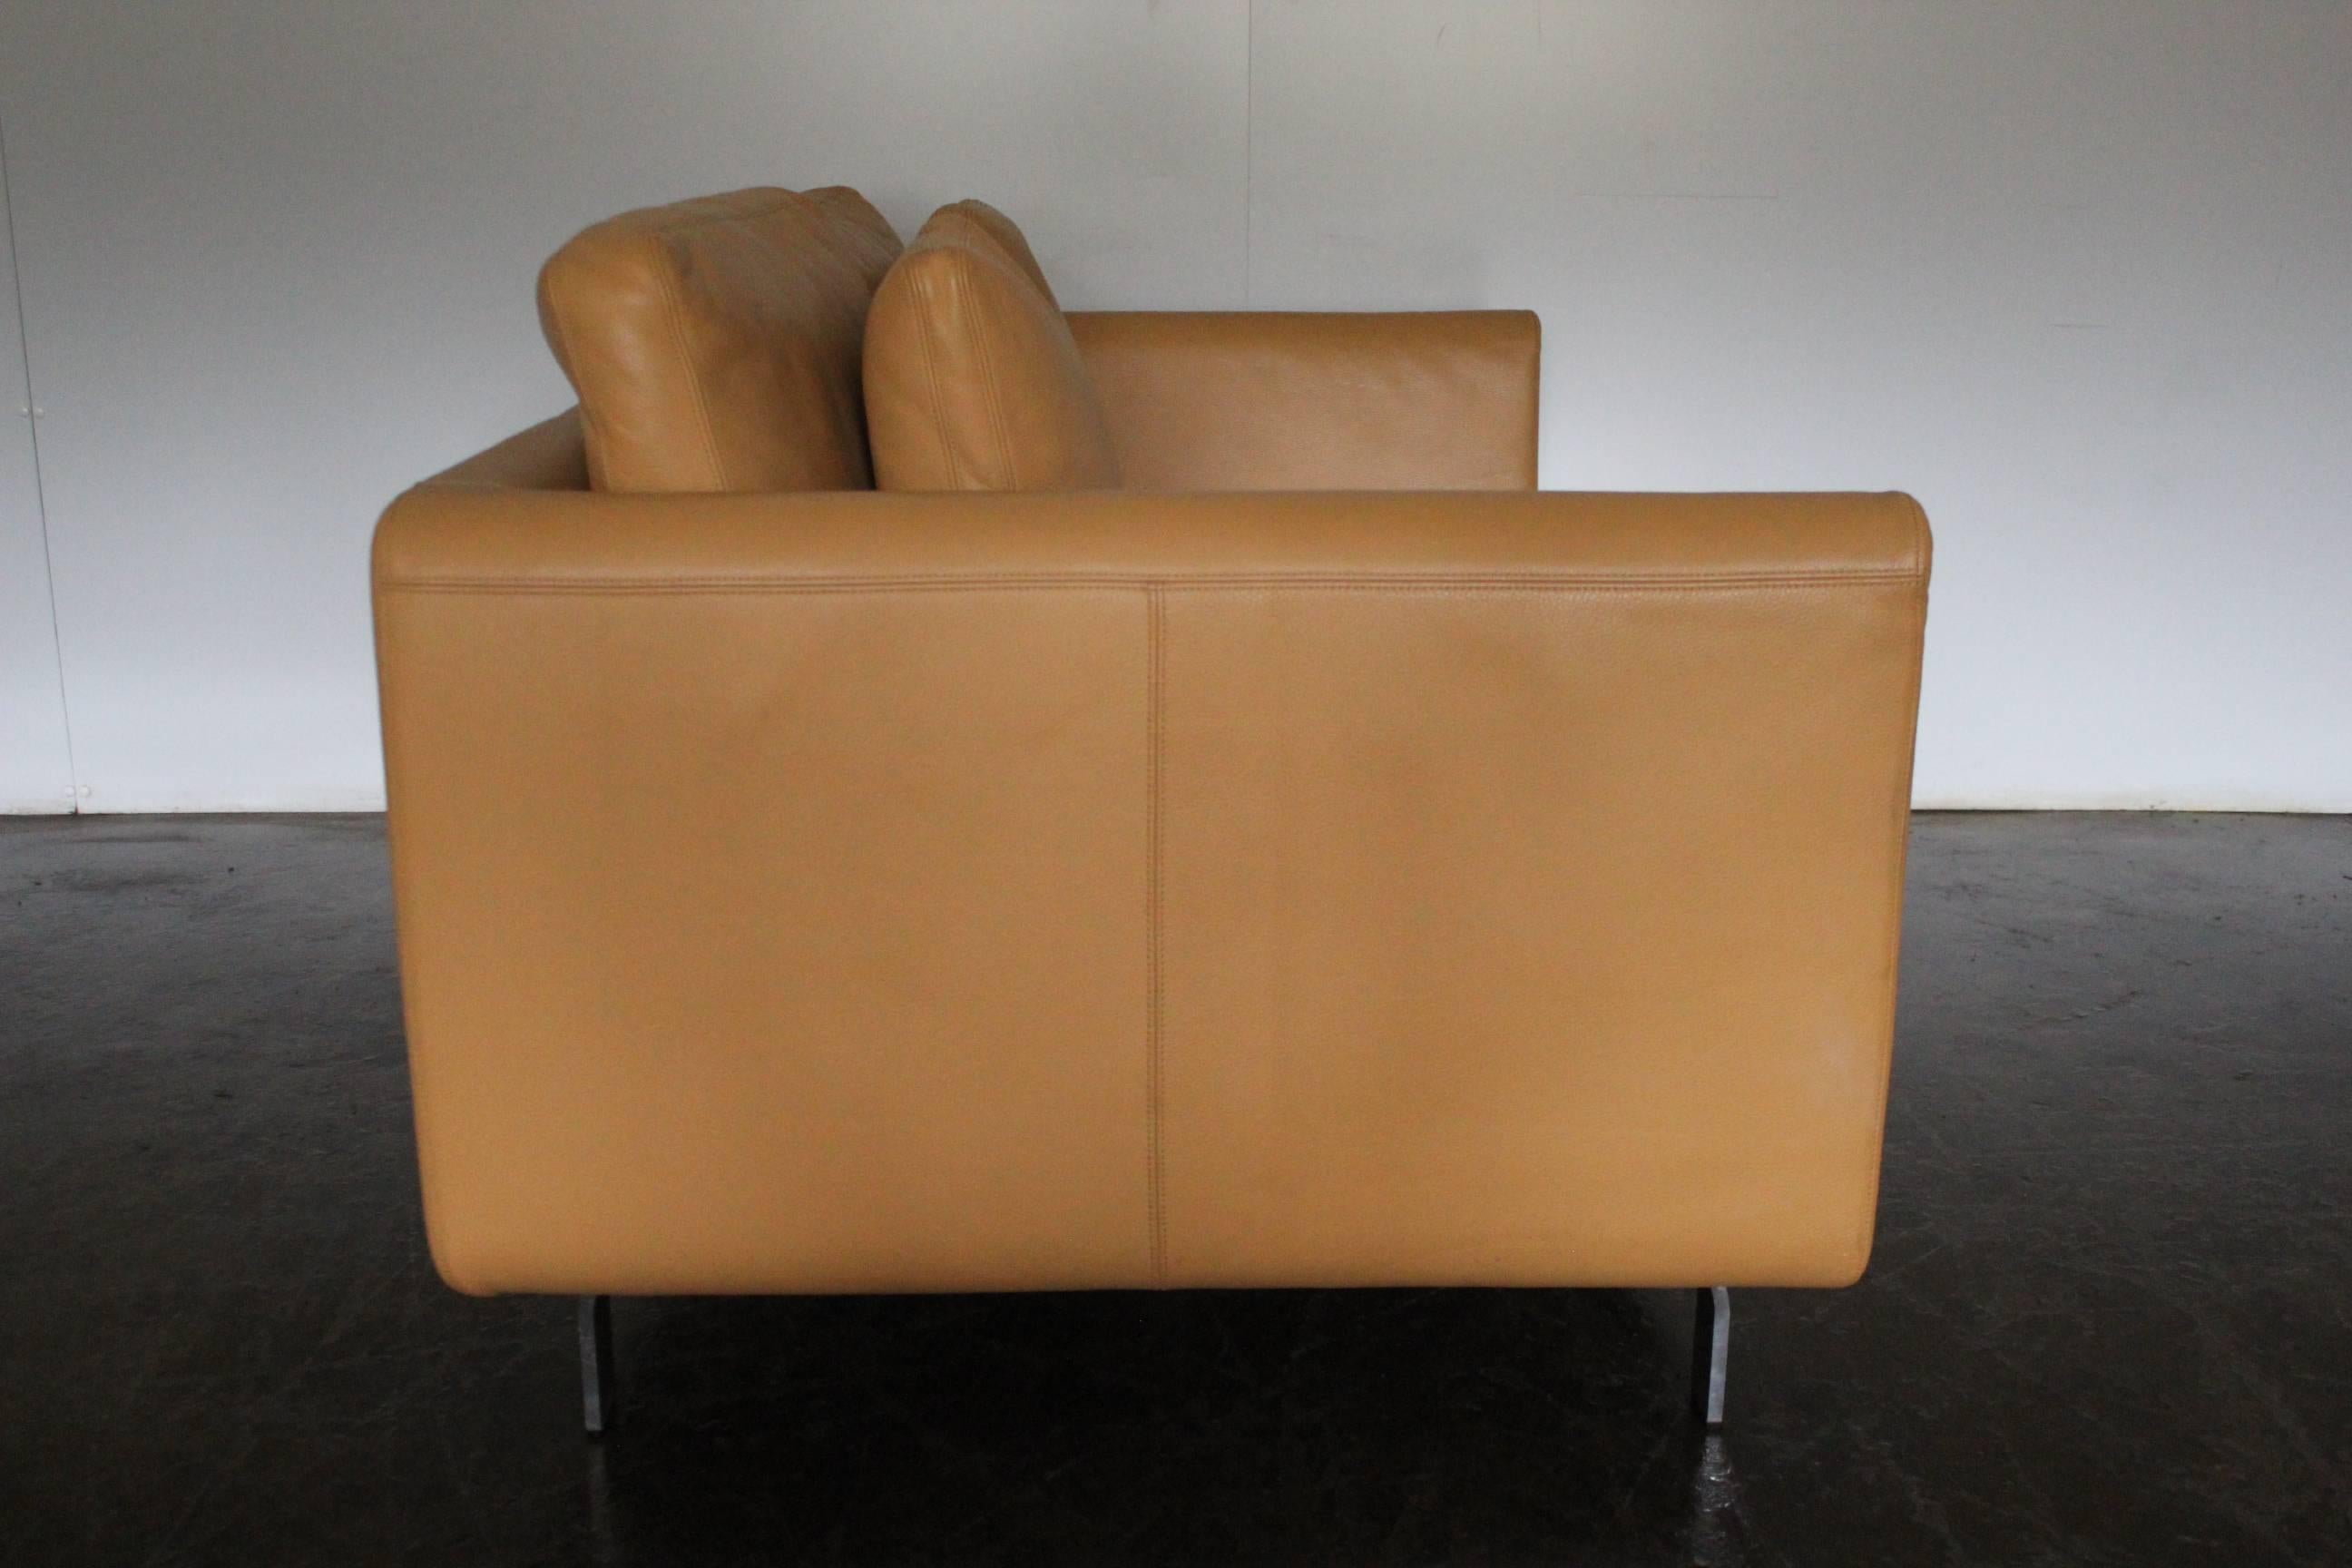 German Pair of Walter Knoll Two-Seat Sofas in Pristine Pale-Tan Leather